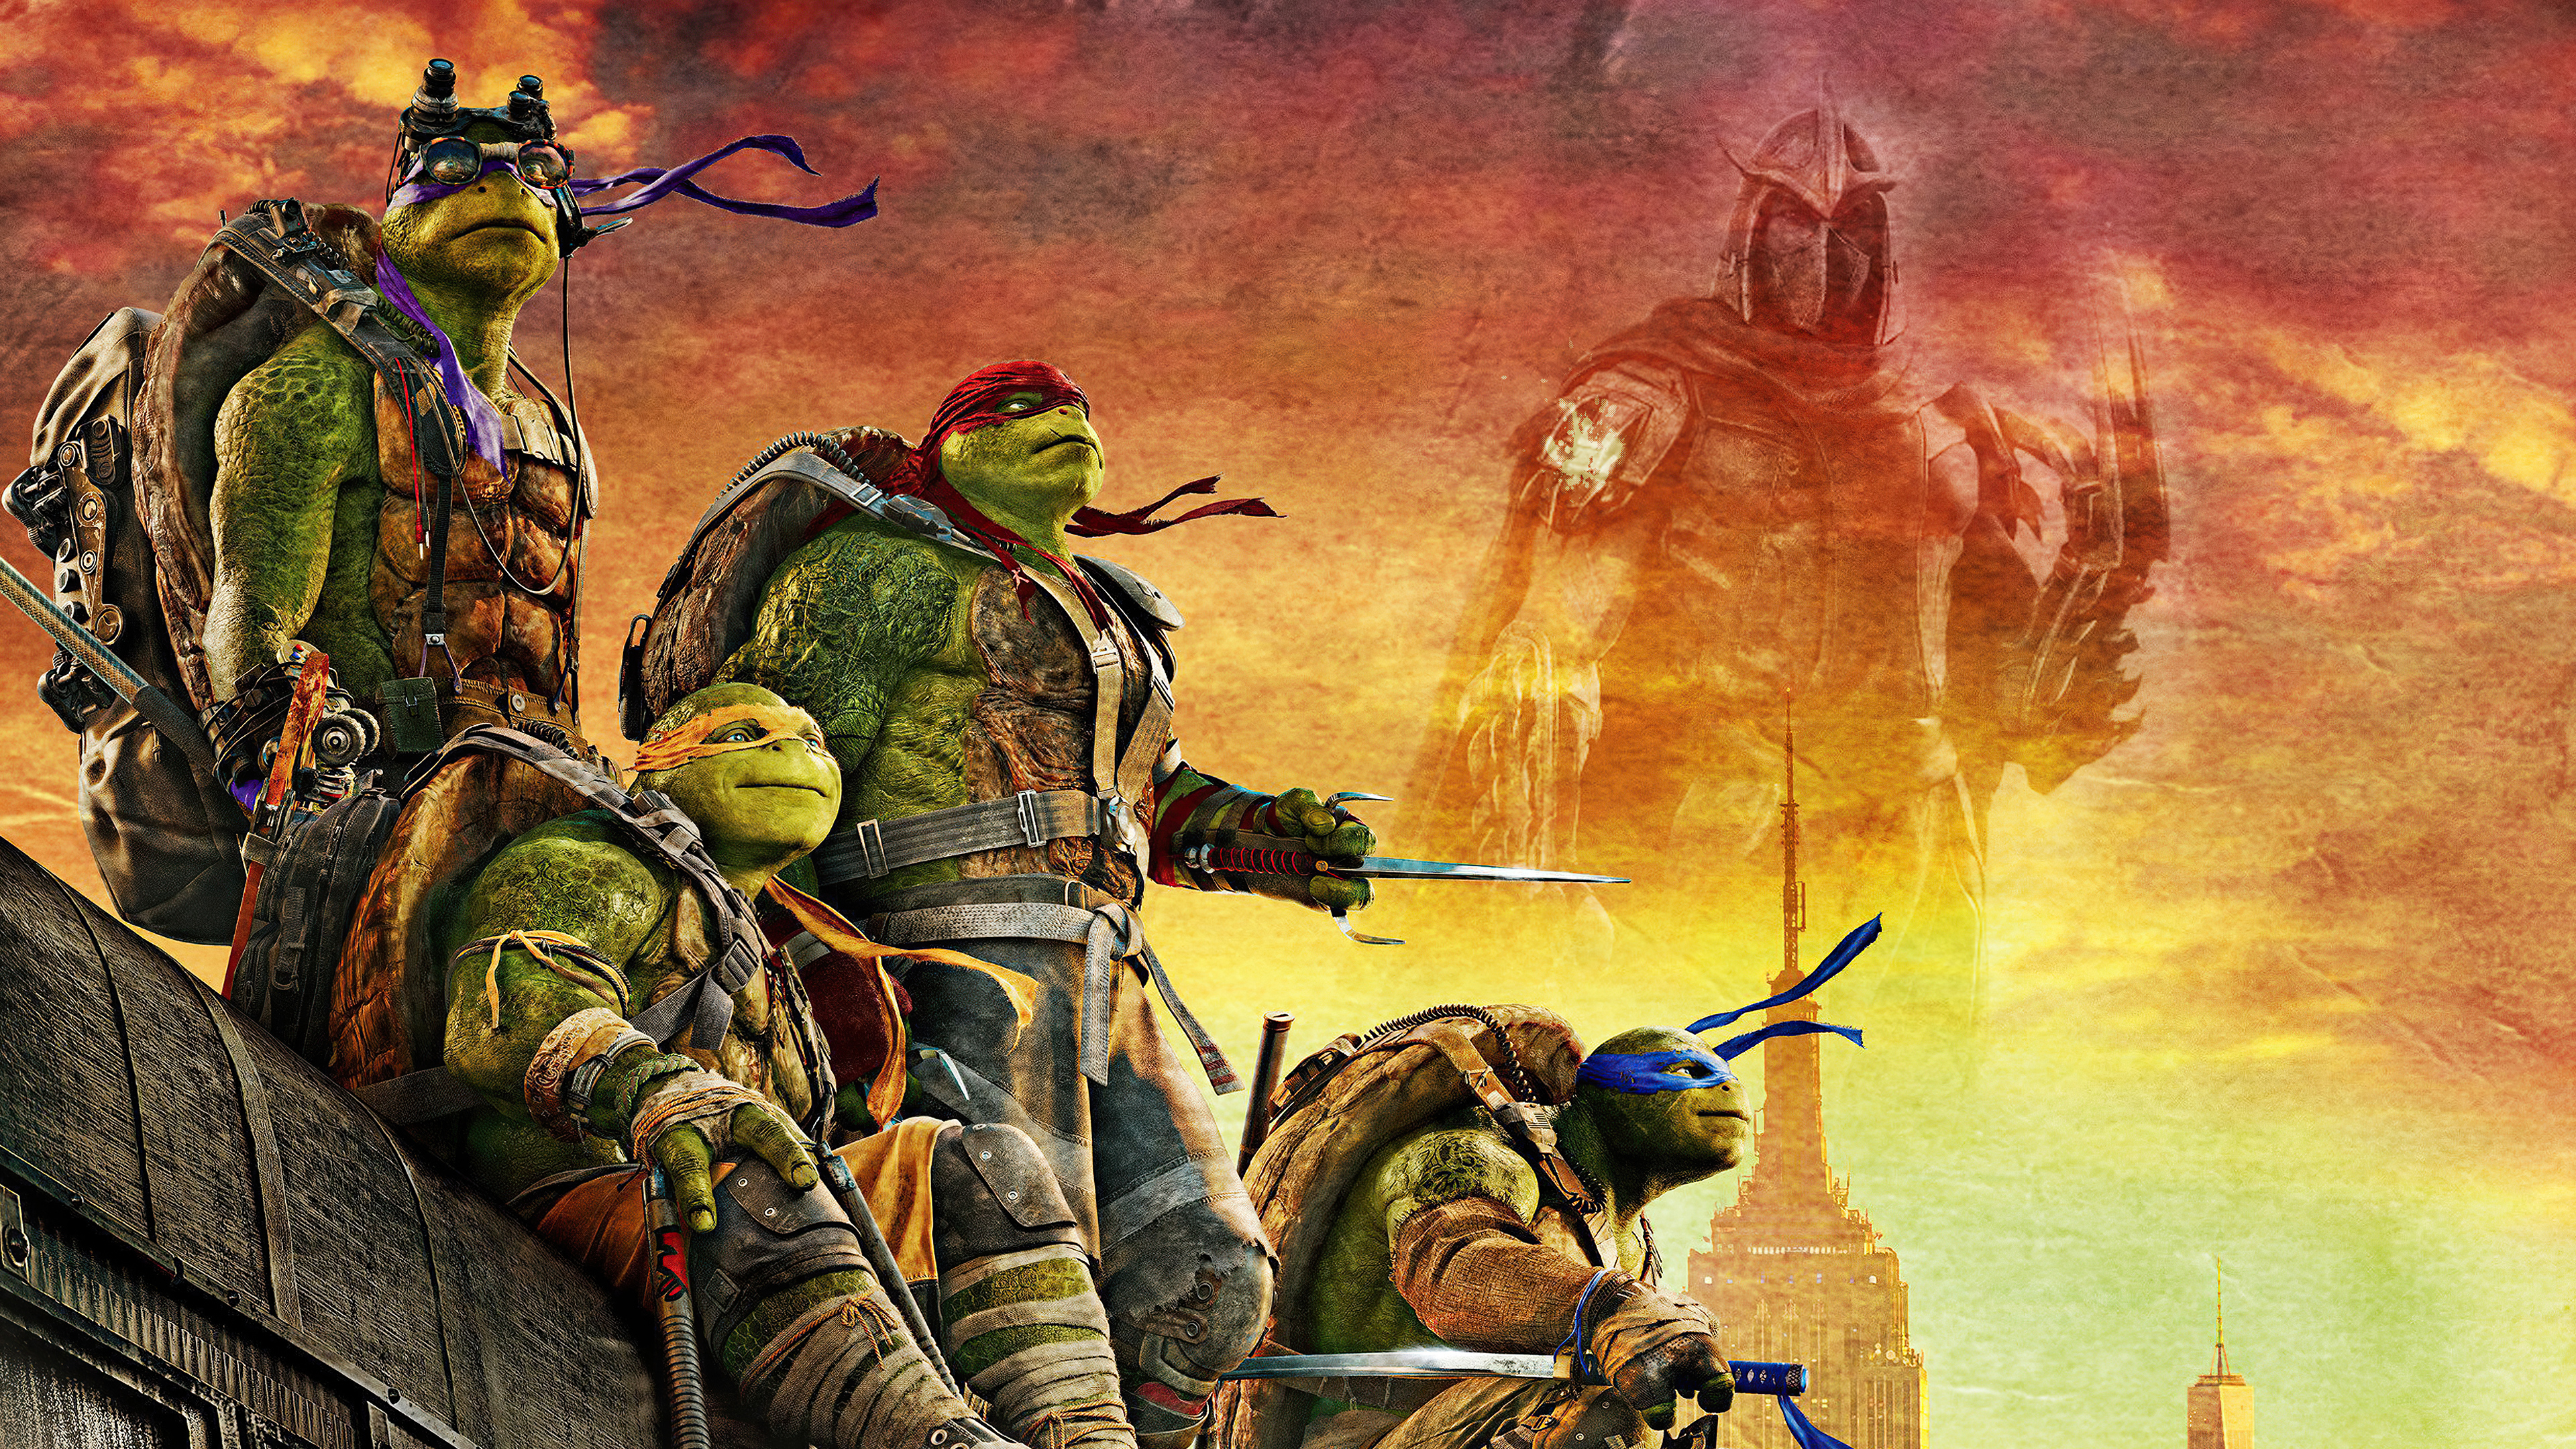 Teenage mutant ninja turtles movie poster k hd movies k wallpapers images backgrounds photos and pictures